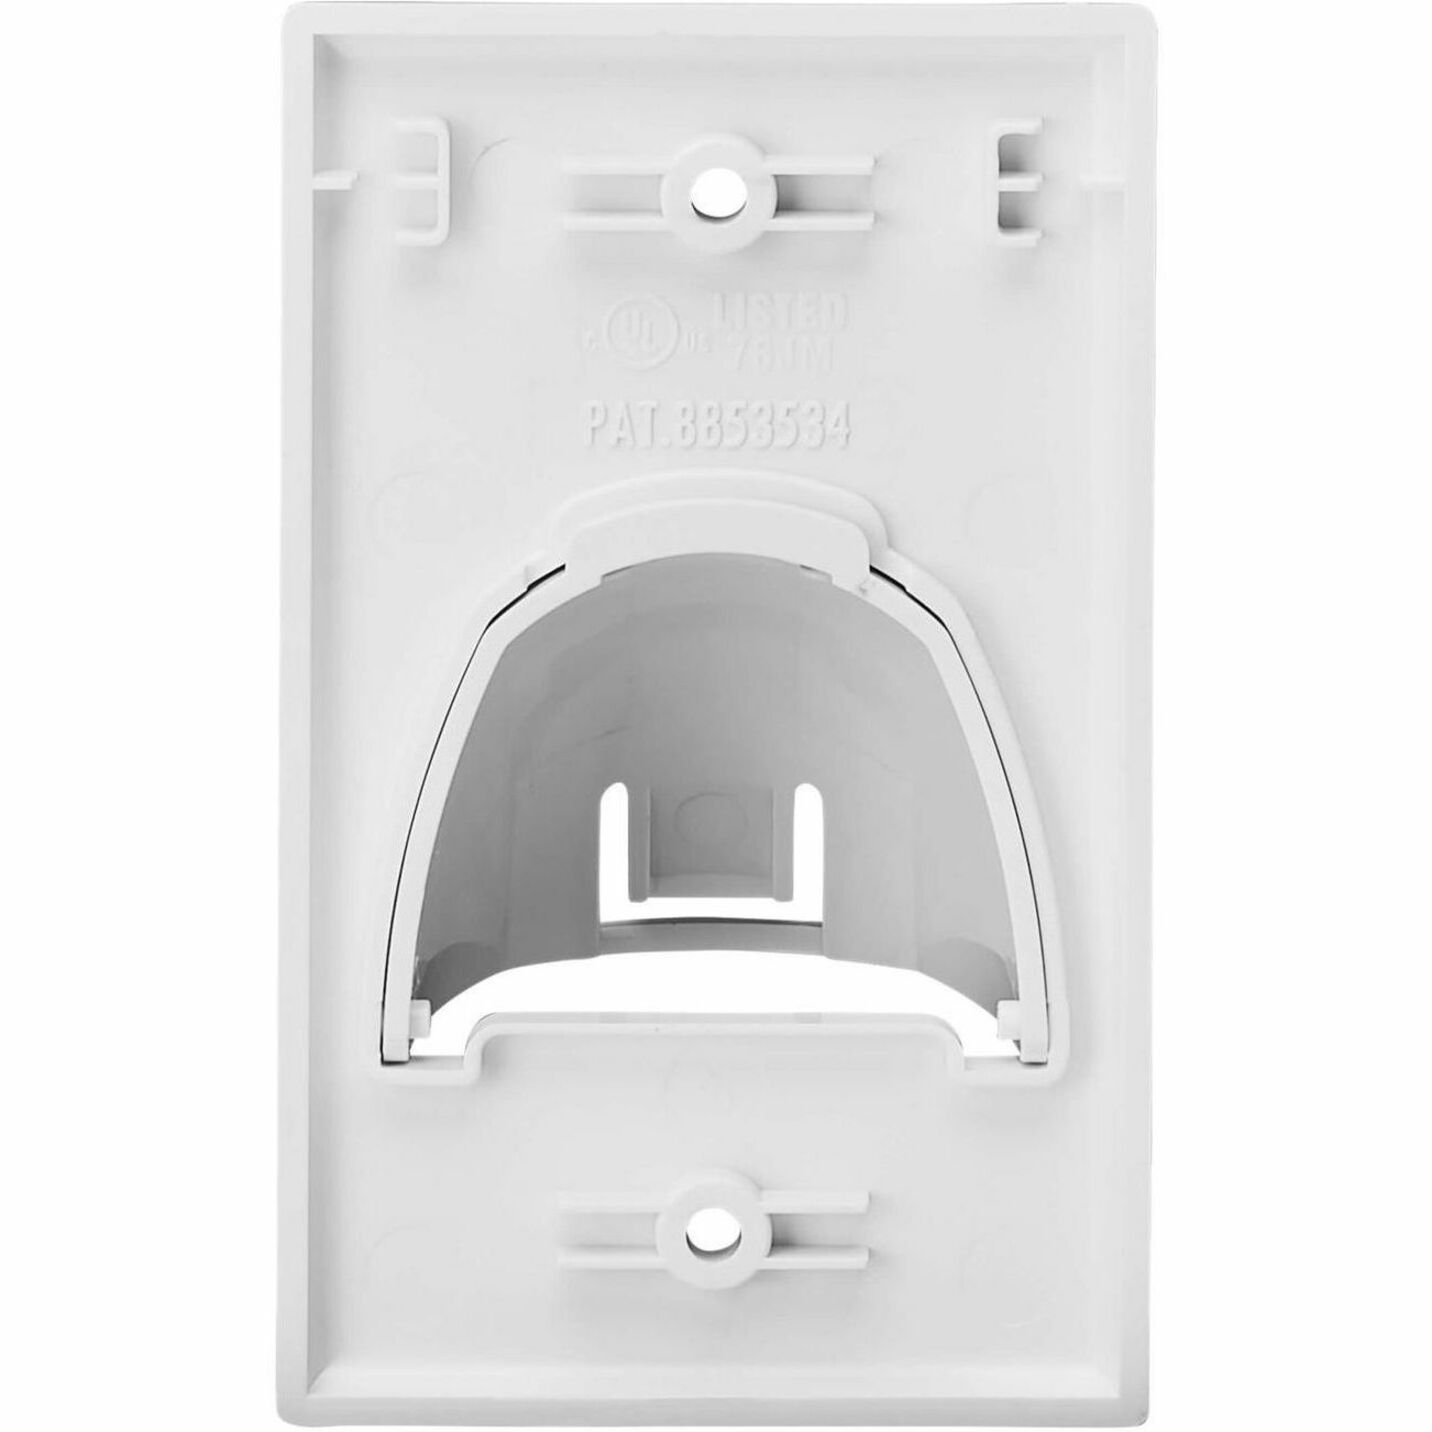 Tripp Lite N042-BC1-WH Single-Gang Up-or Down-Angle Bulk Cable Wall Plate, White, TAA Compliant, Home Theater, Auditorium, Office, Conference Room